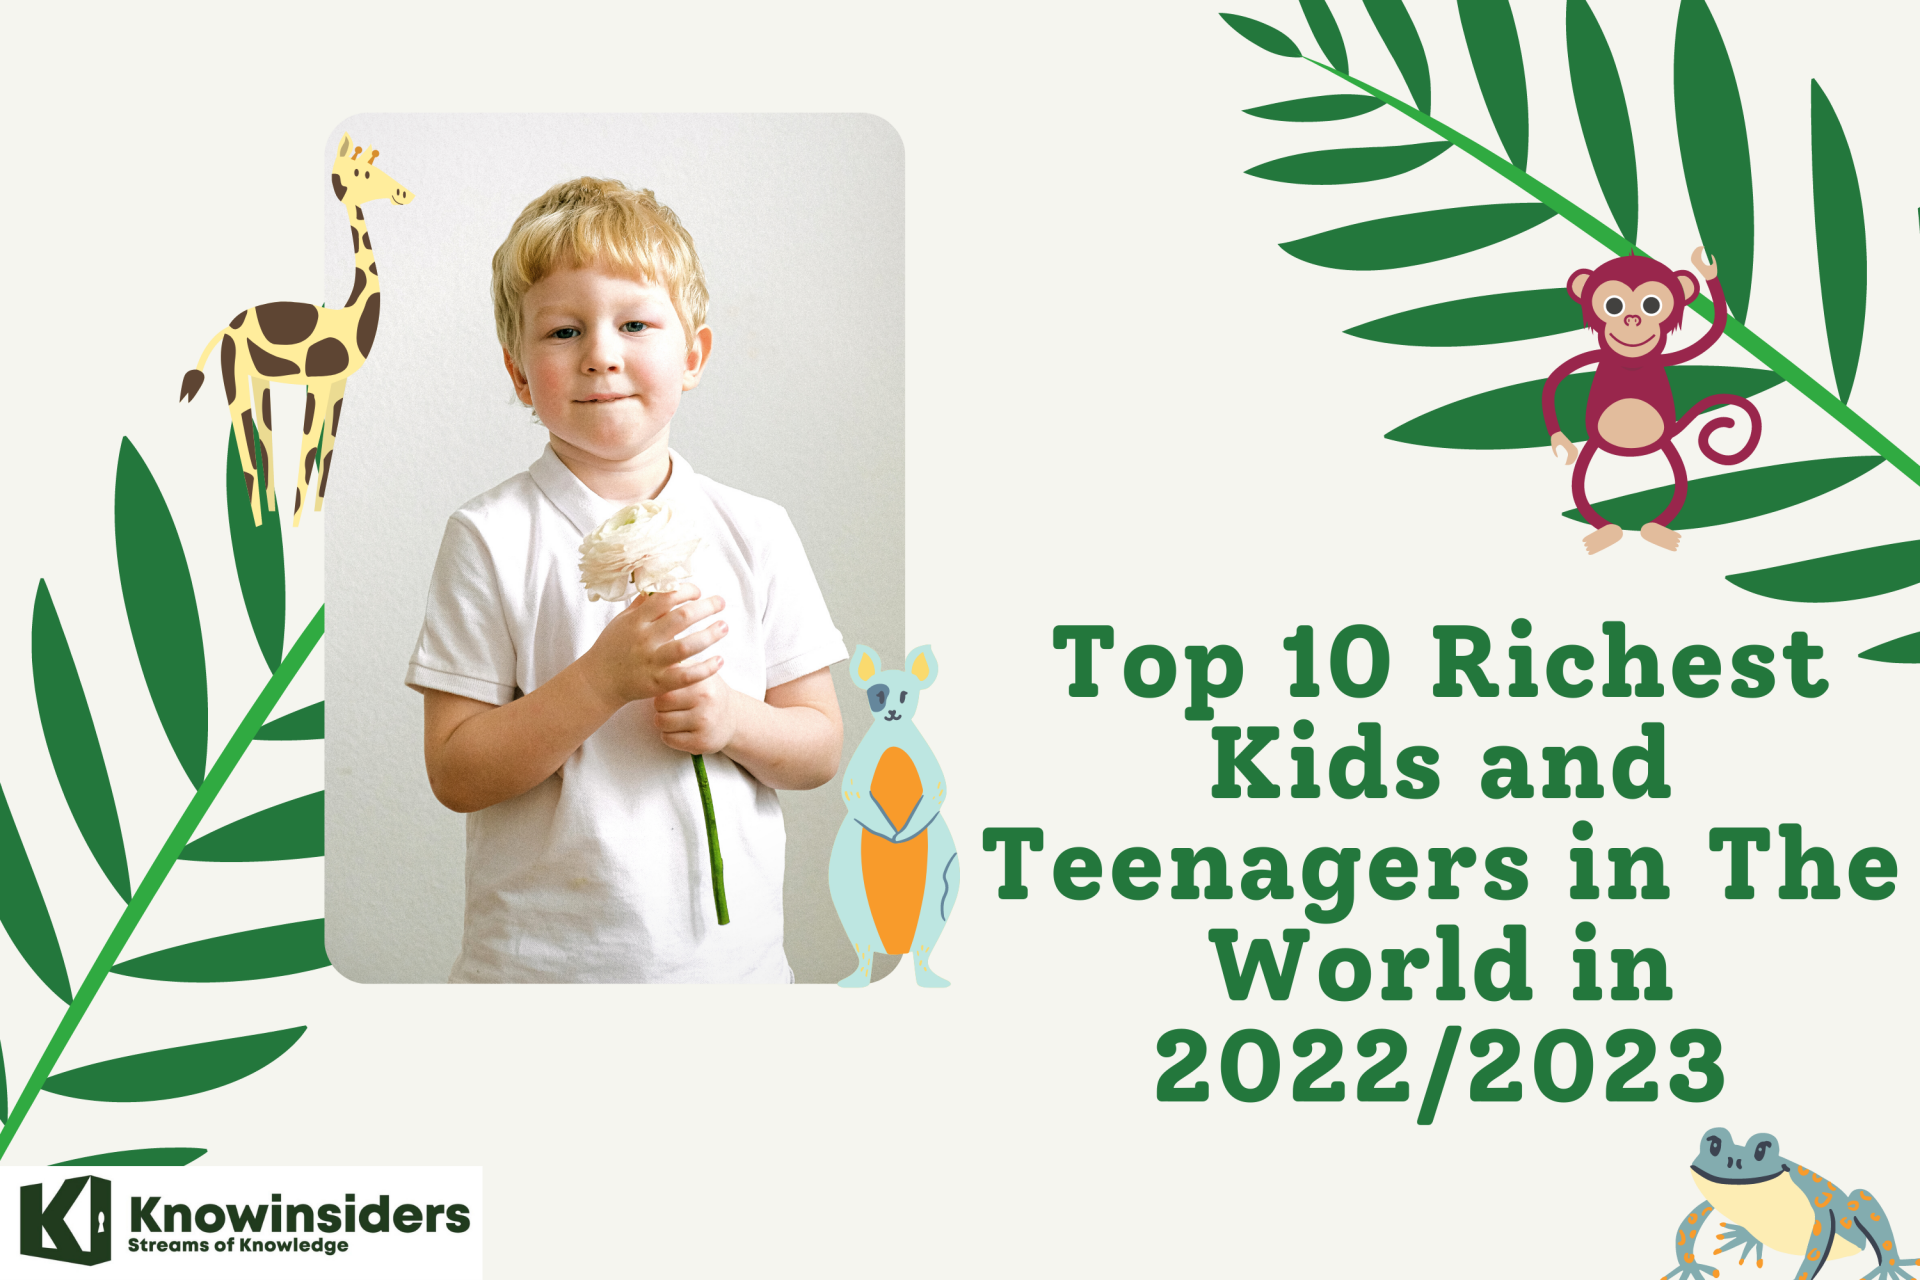 Top 10 Richest Kids and Teenagers in The World in 2022/2023